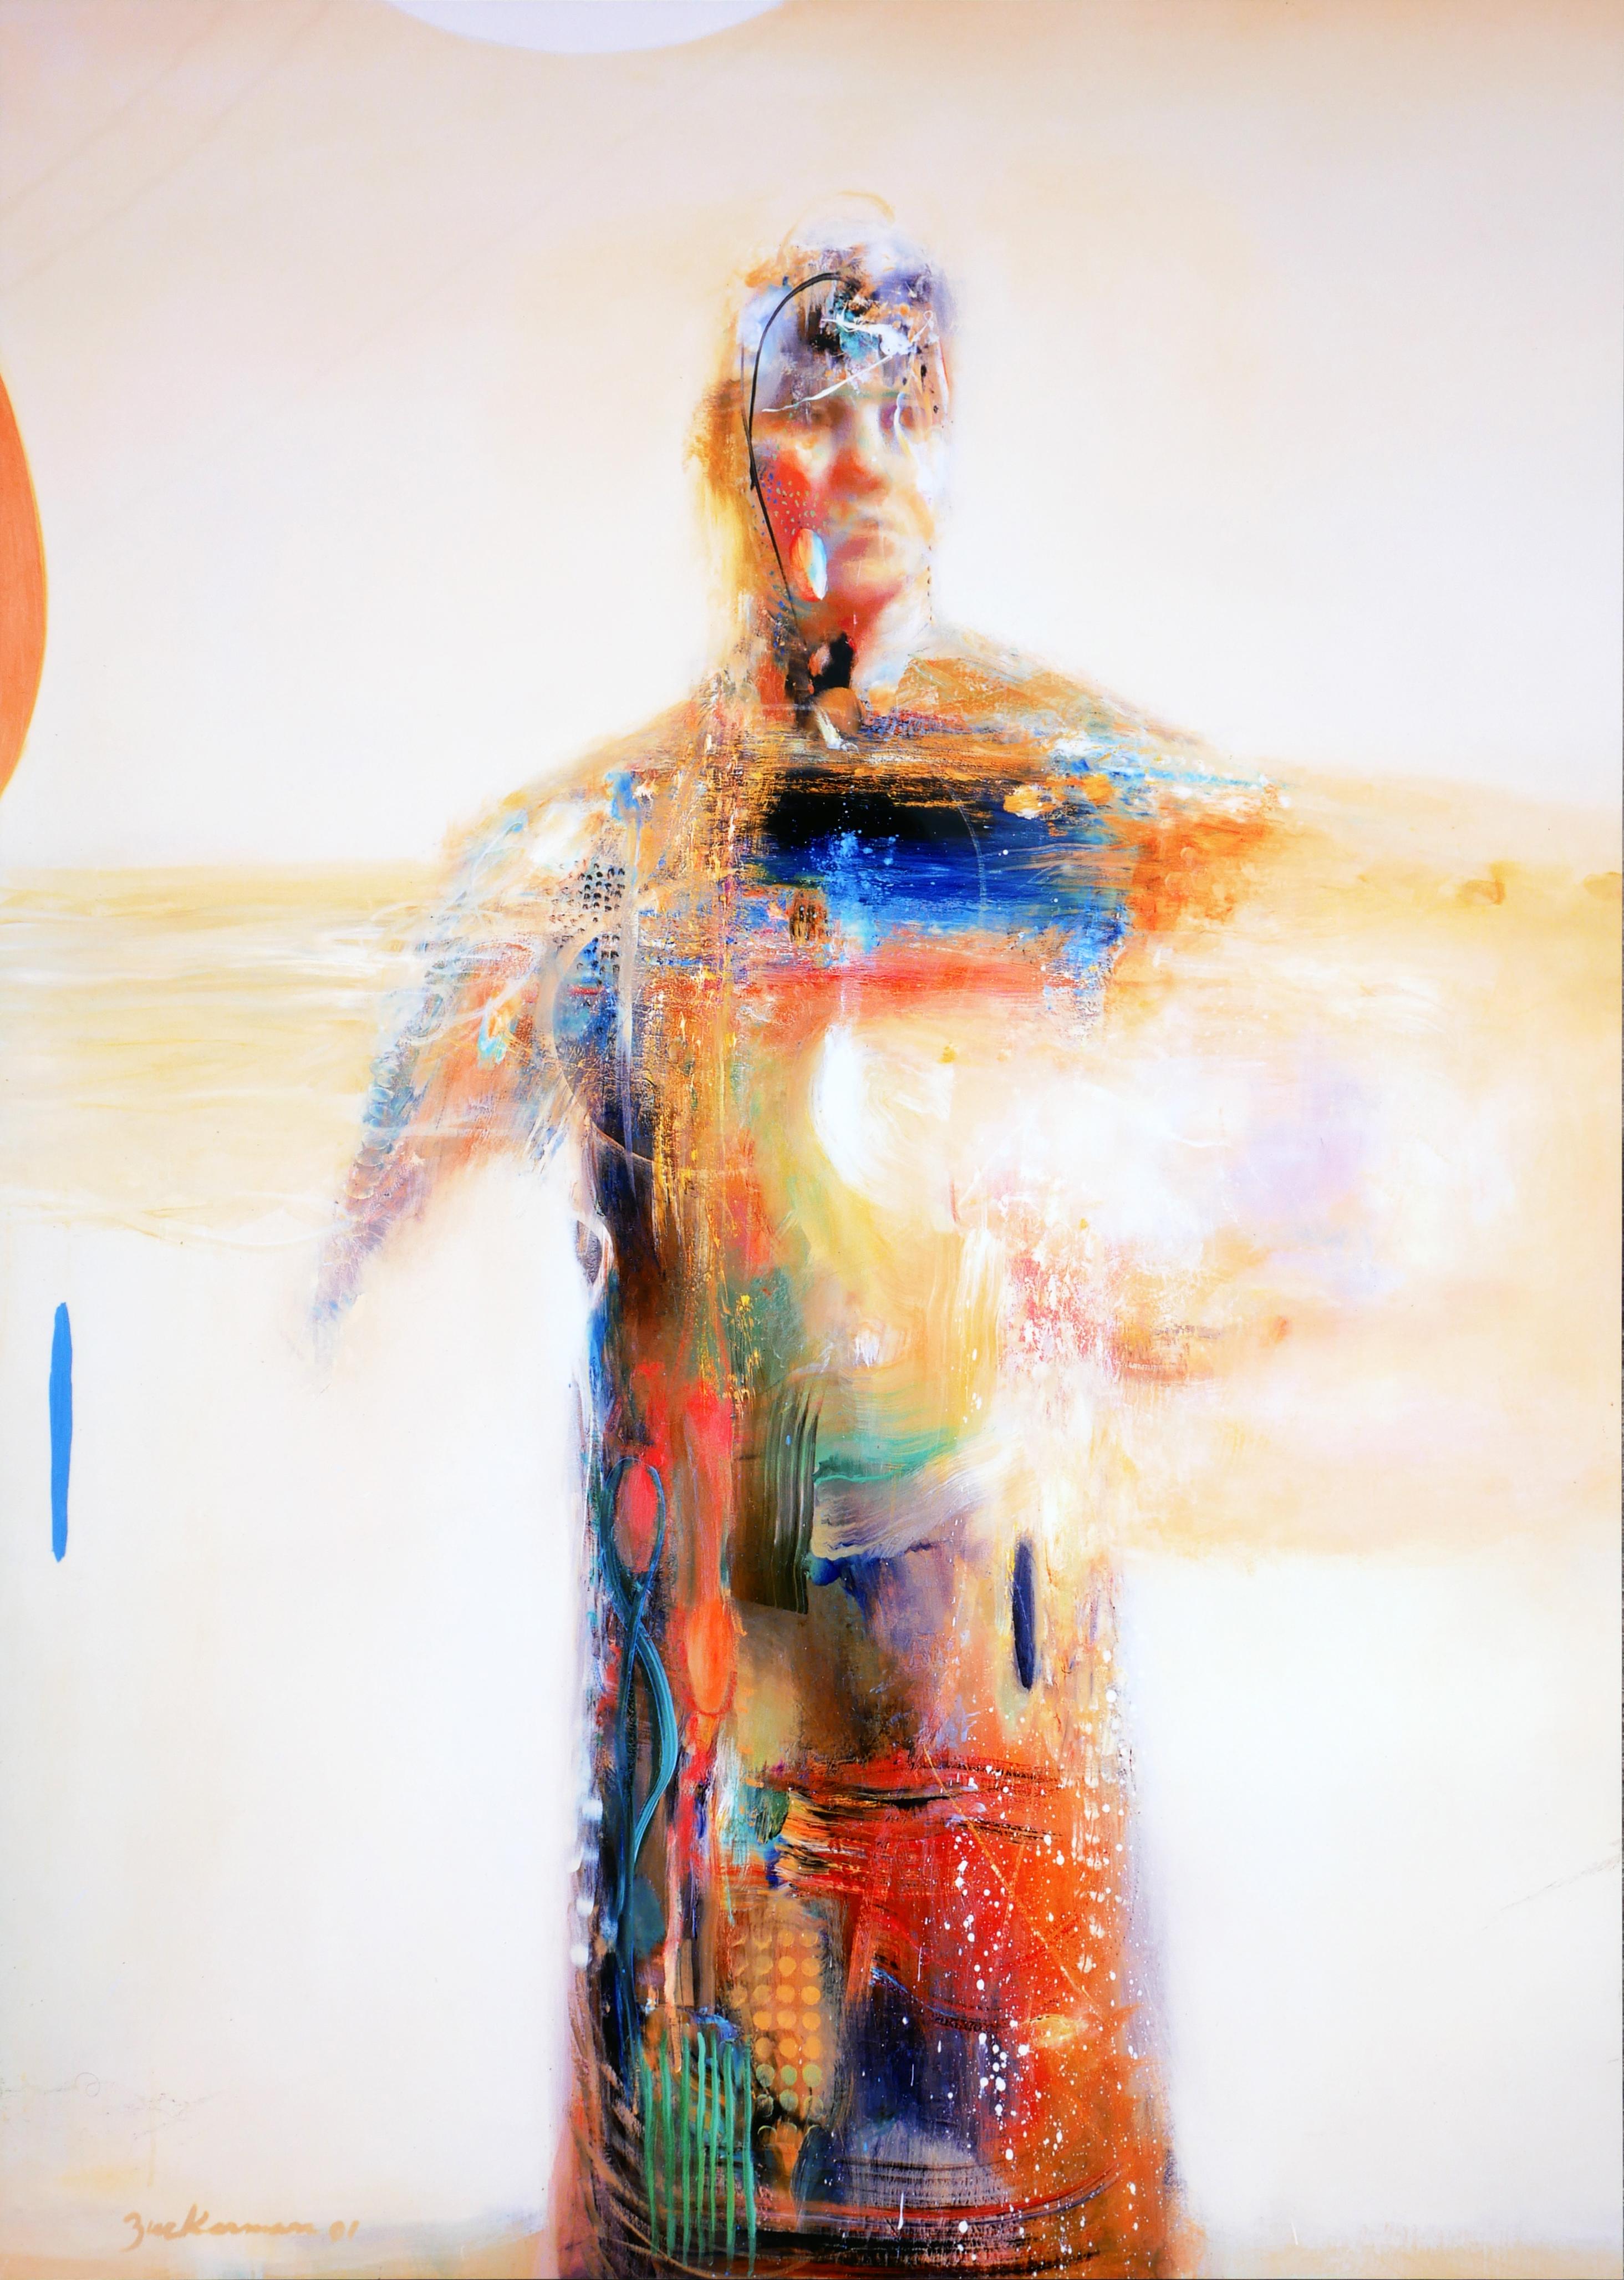 Kevin Zuckerman Abstract Drawing - "Heart of Man" Orange and Blue Abstract Figurative Print on Metal